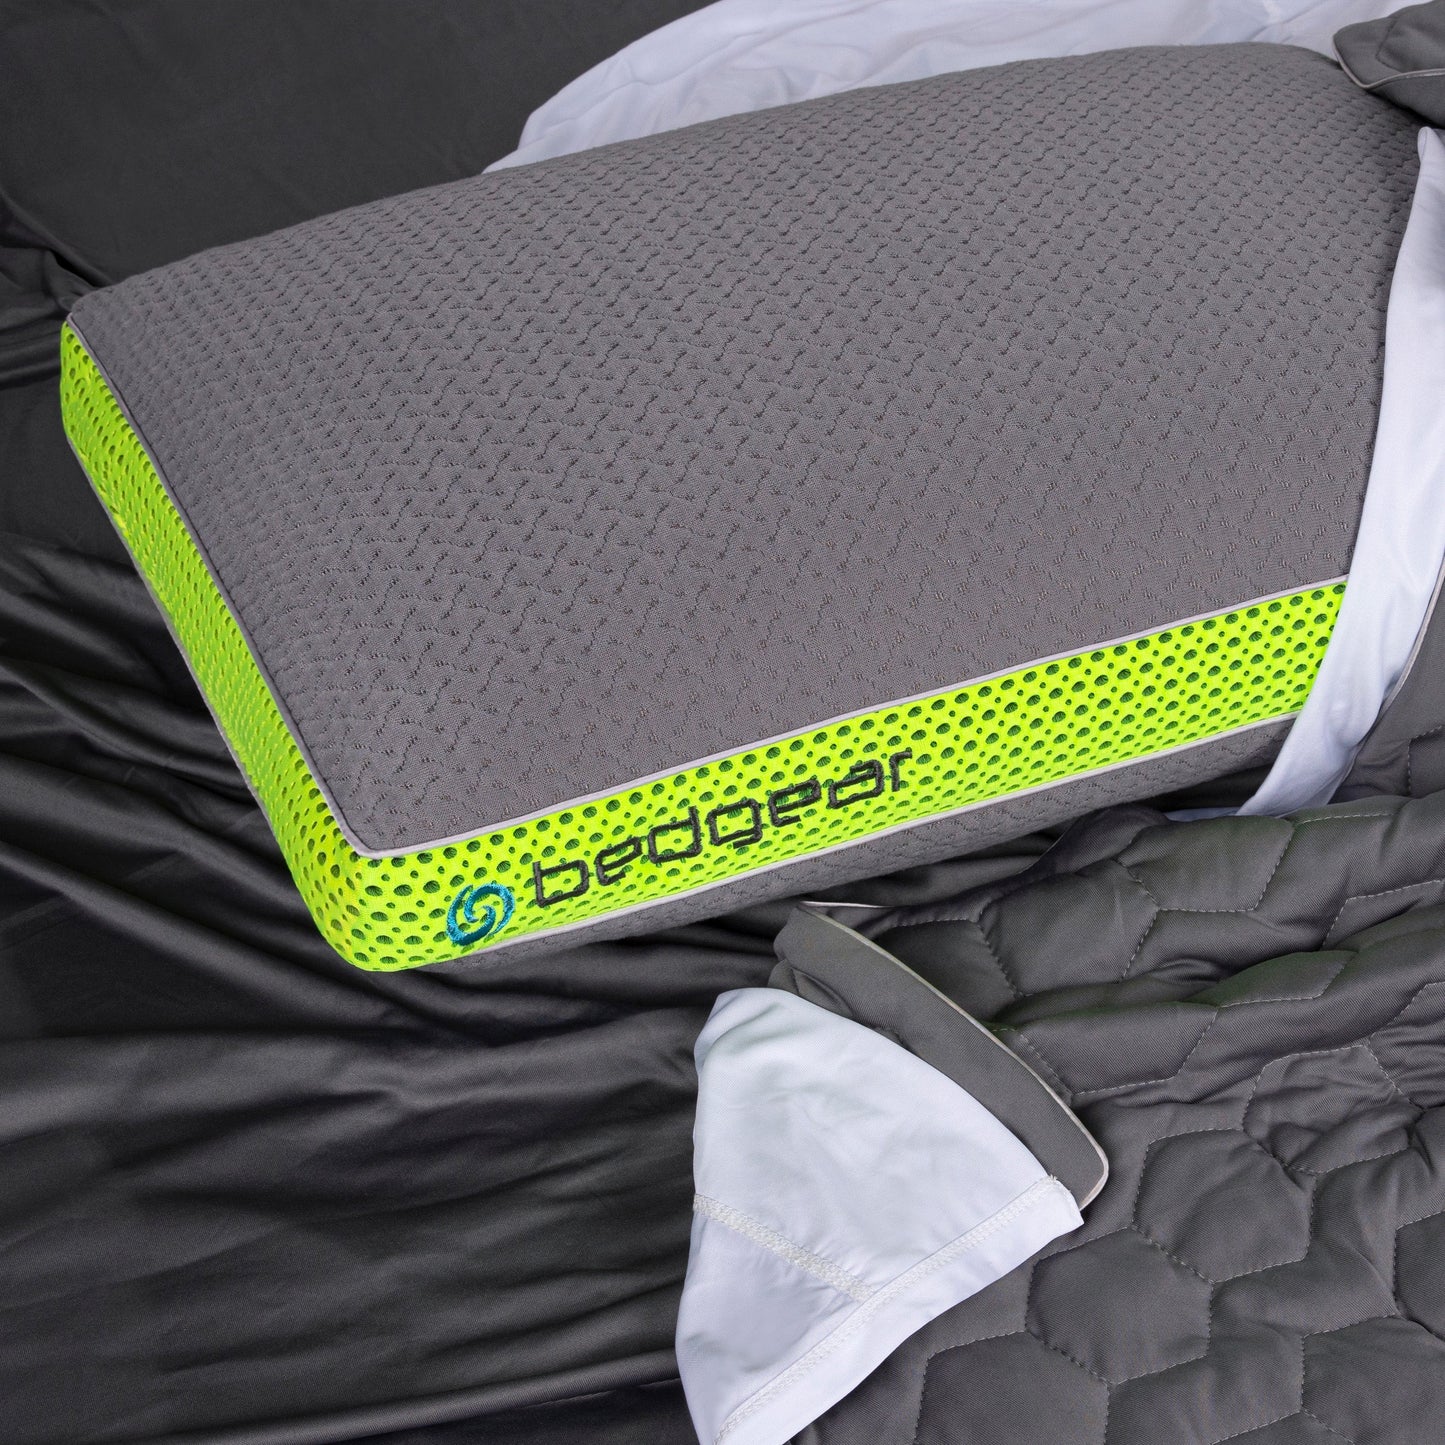 Bedgear Multi Position Performance Pillow In Bed